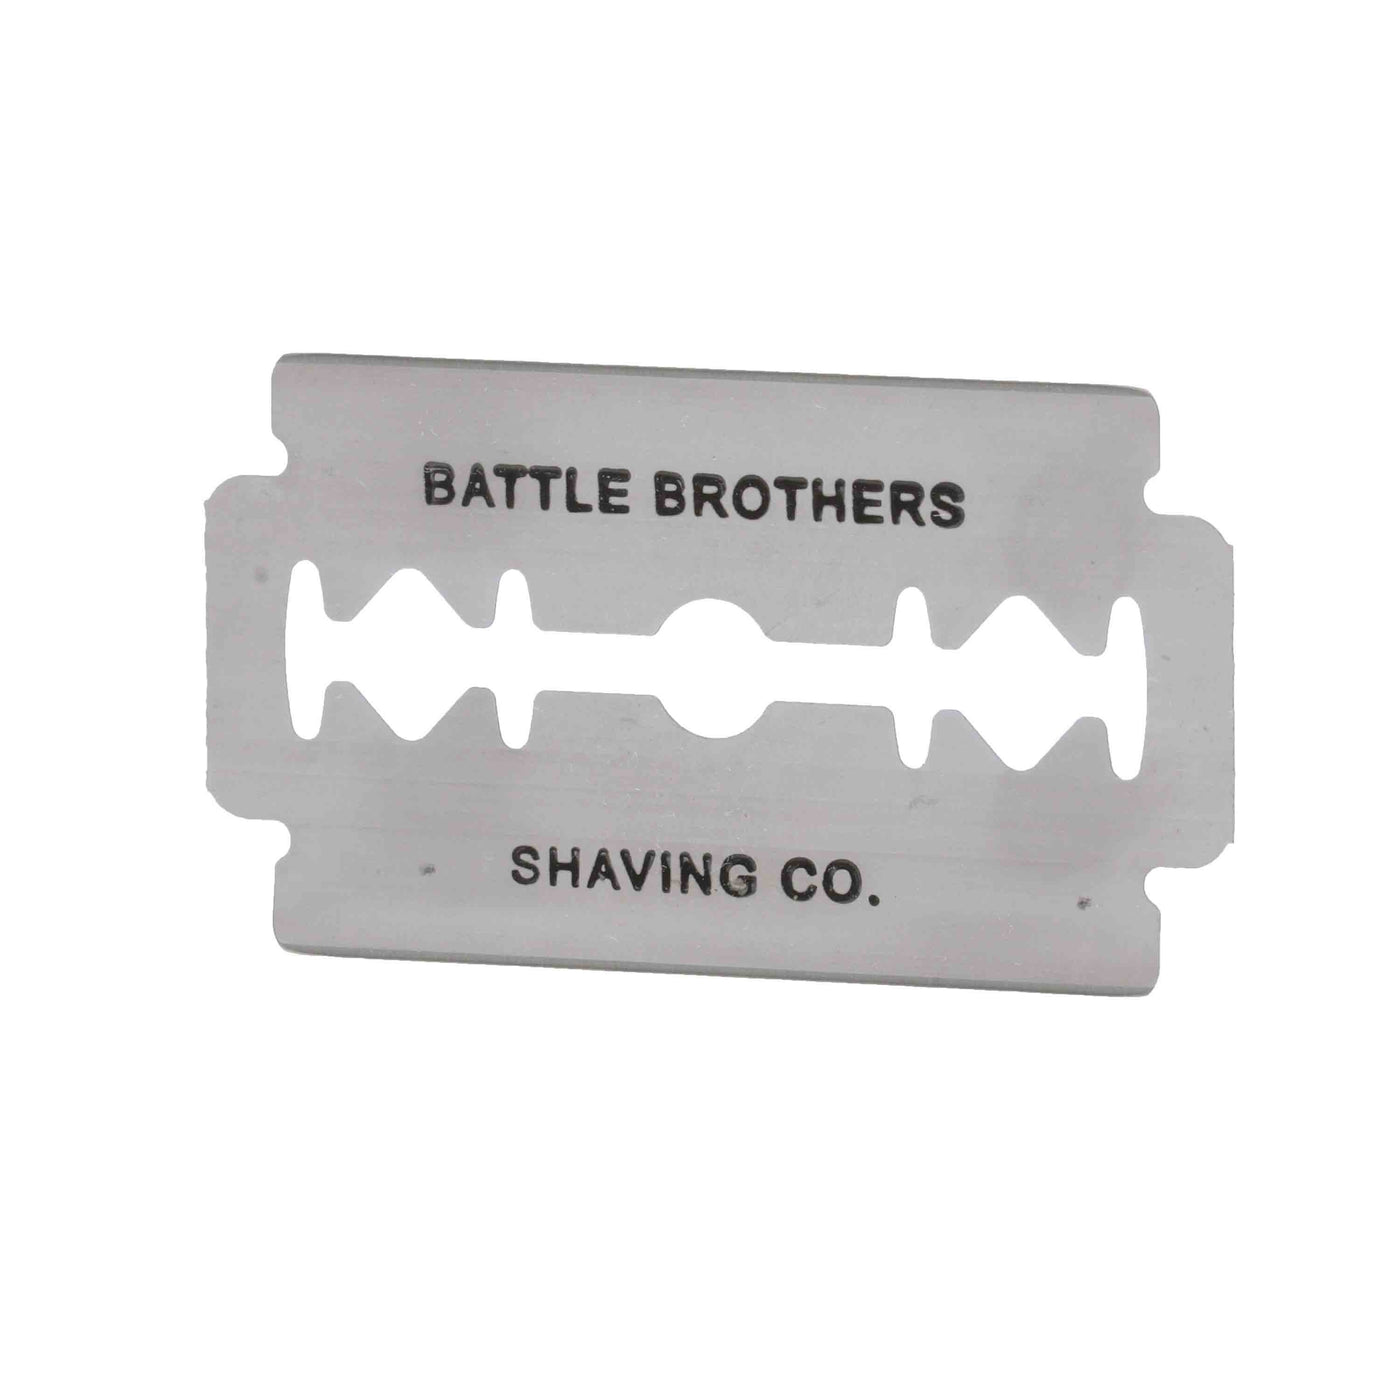 Double Edge Razor Blades by Battle Brothers Shaving Co.